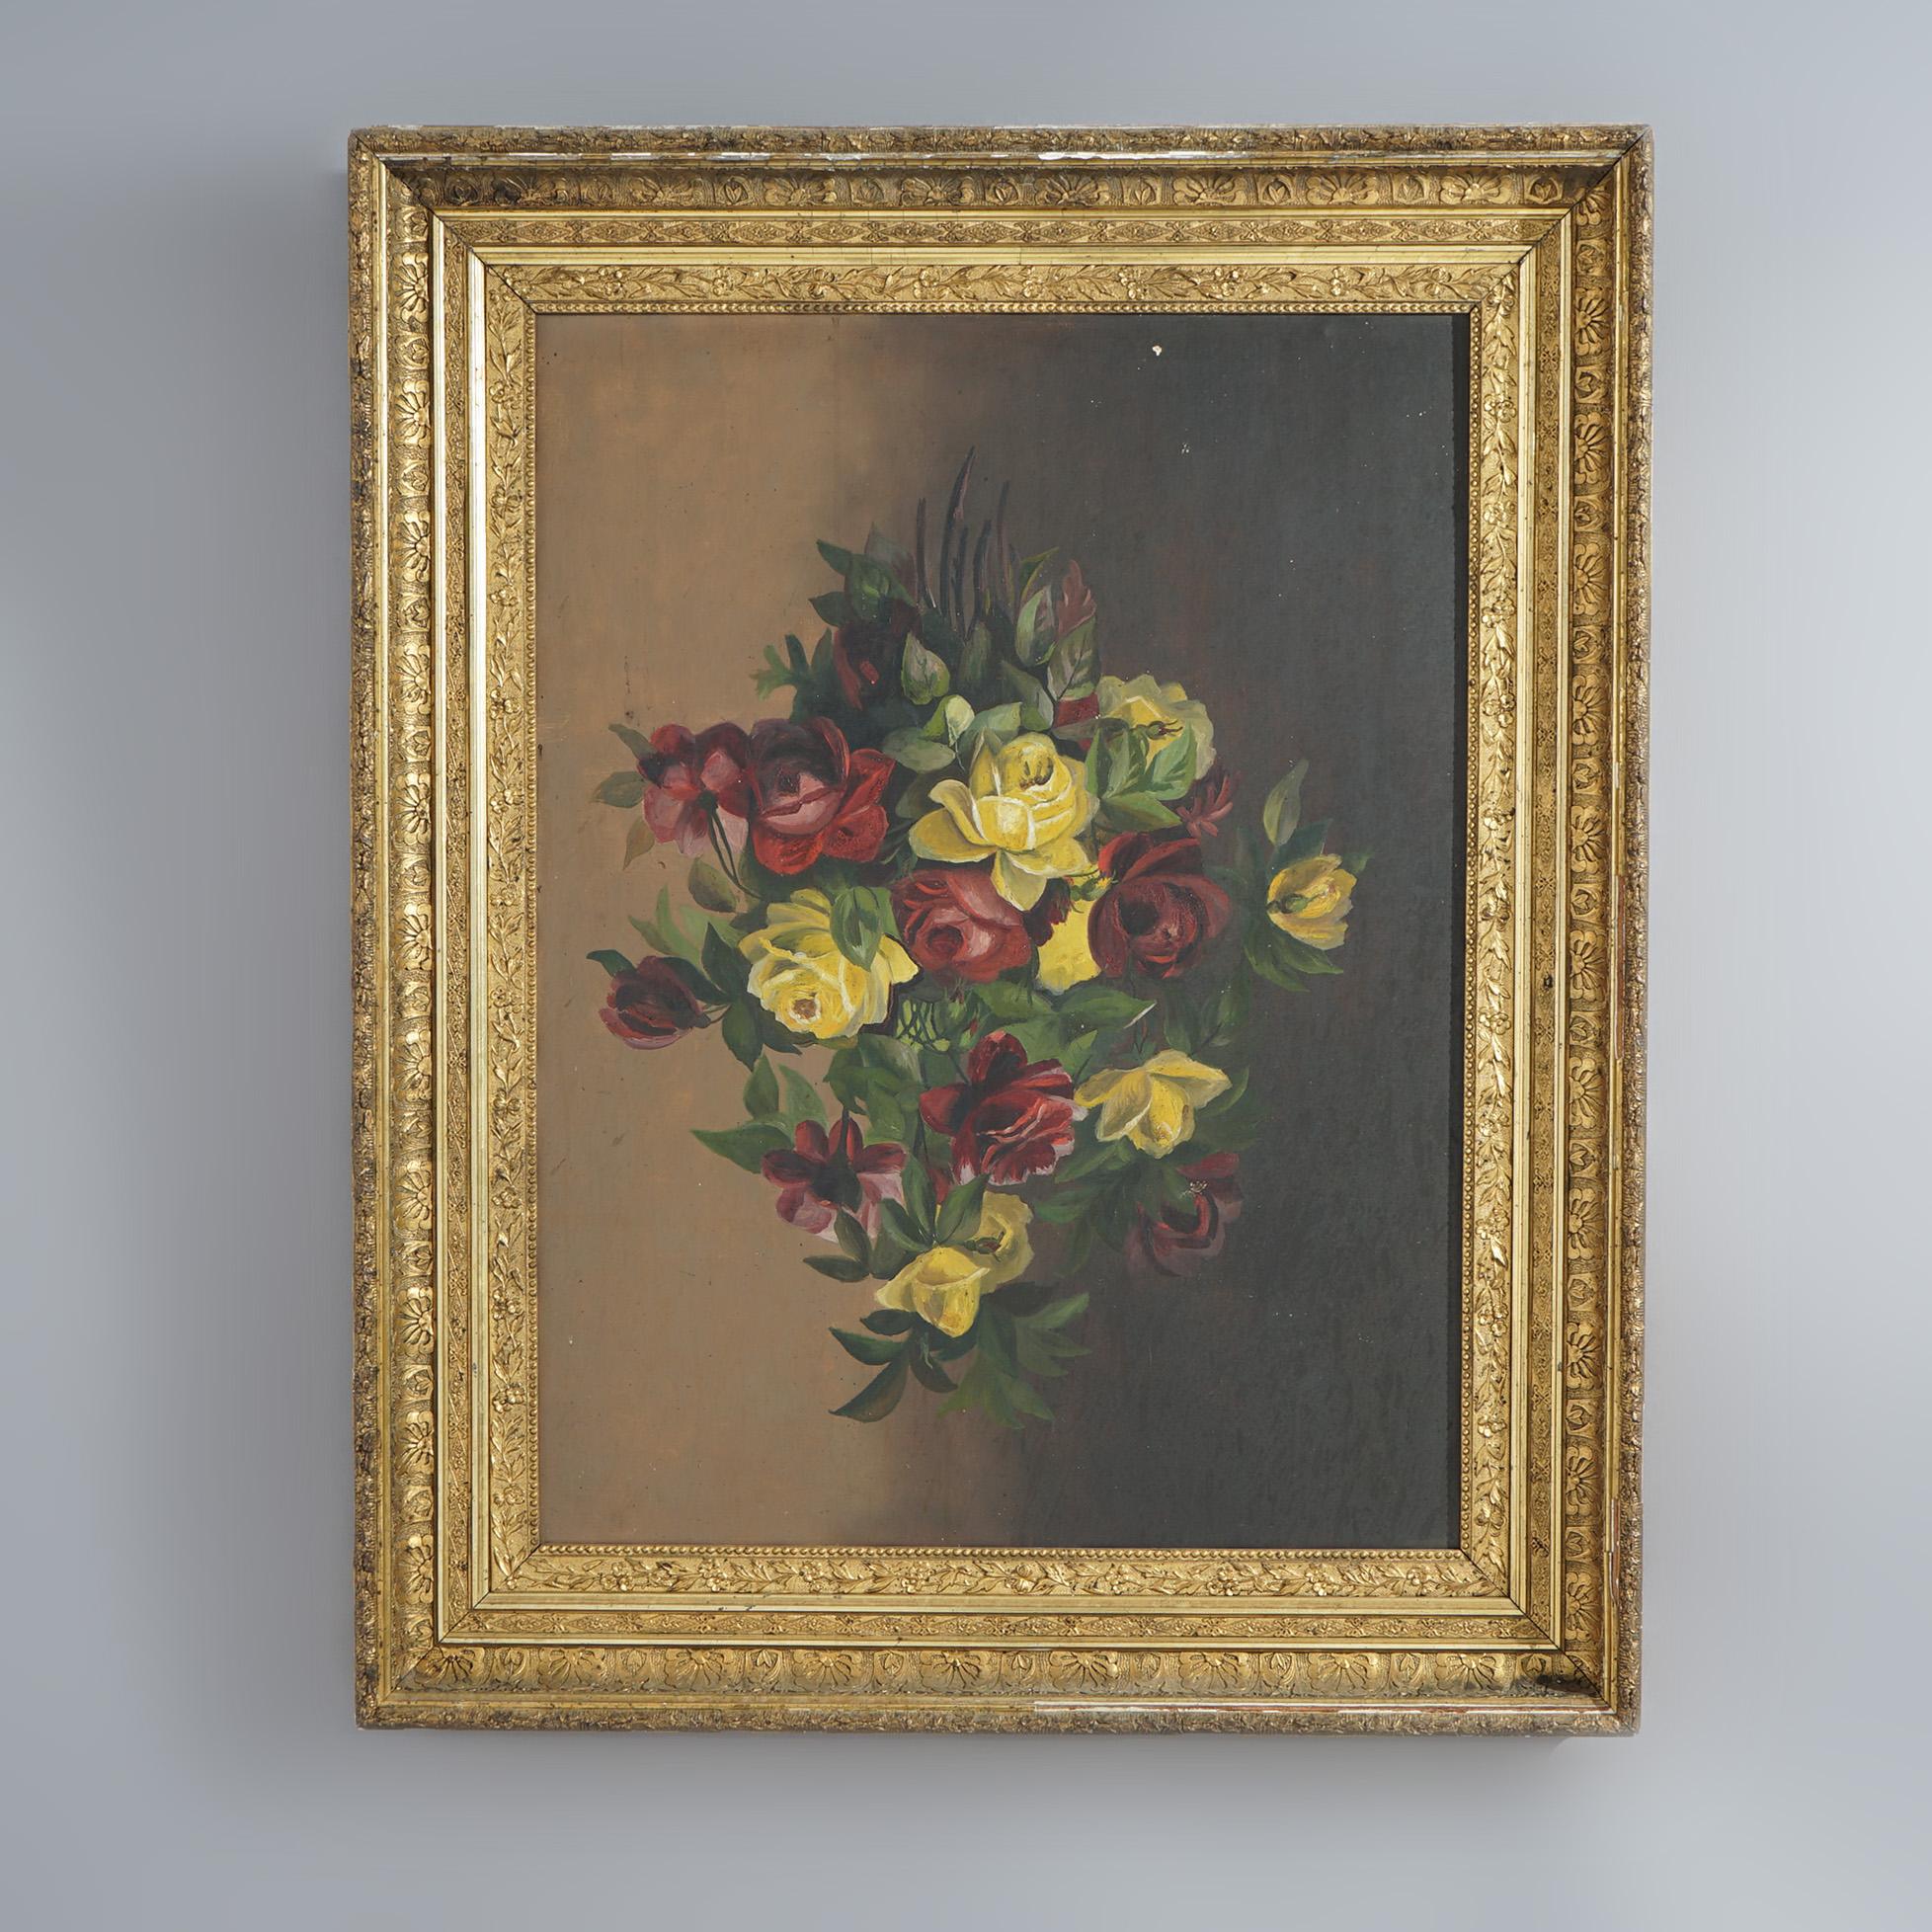 An antique painting offers oil on canvas still life with roses, seated in giltwood frame, c1890

Measures - 40